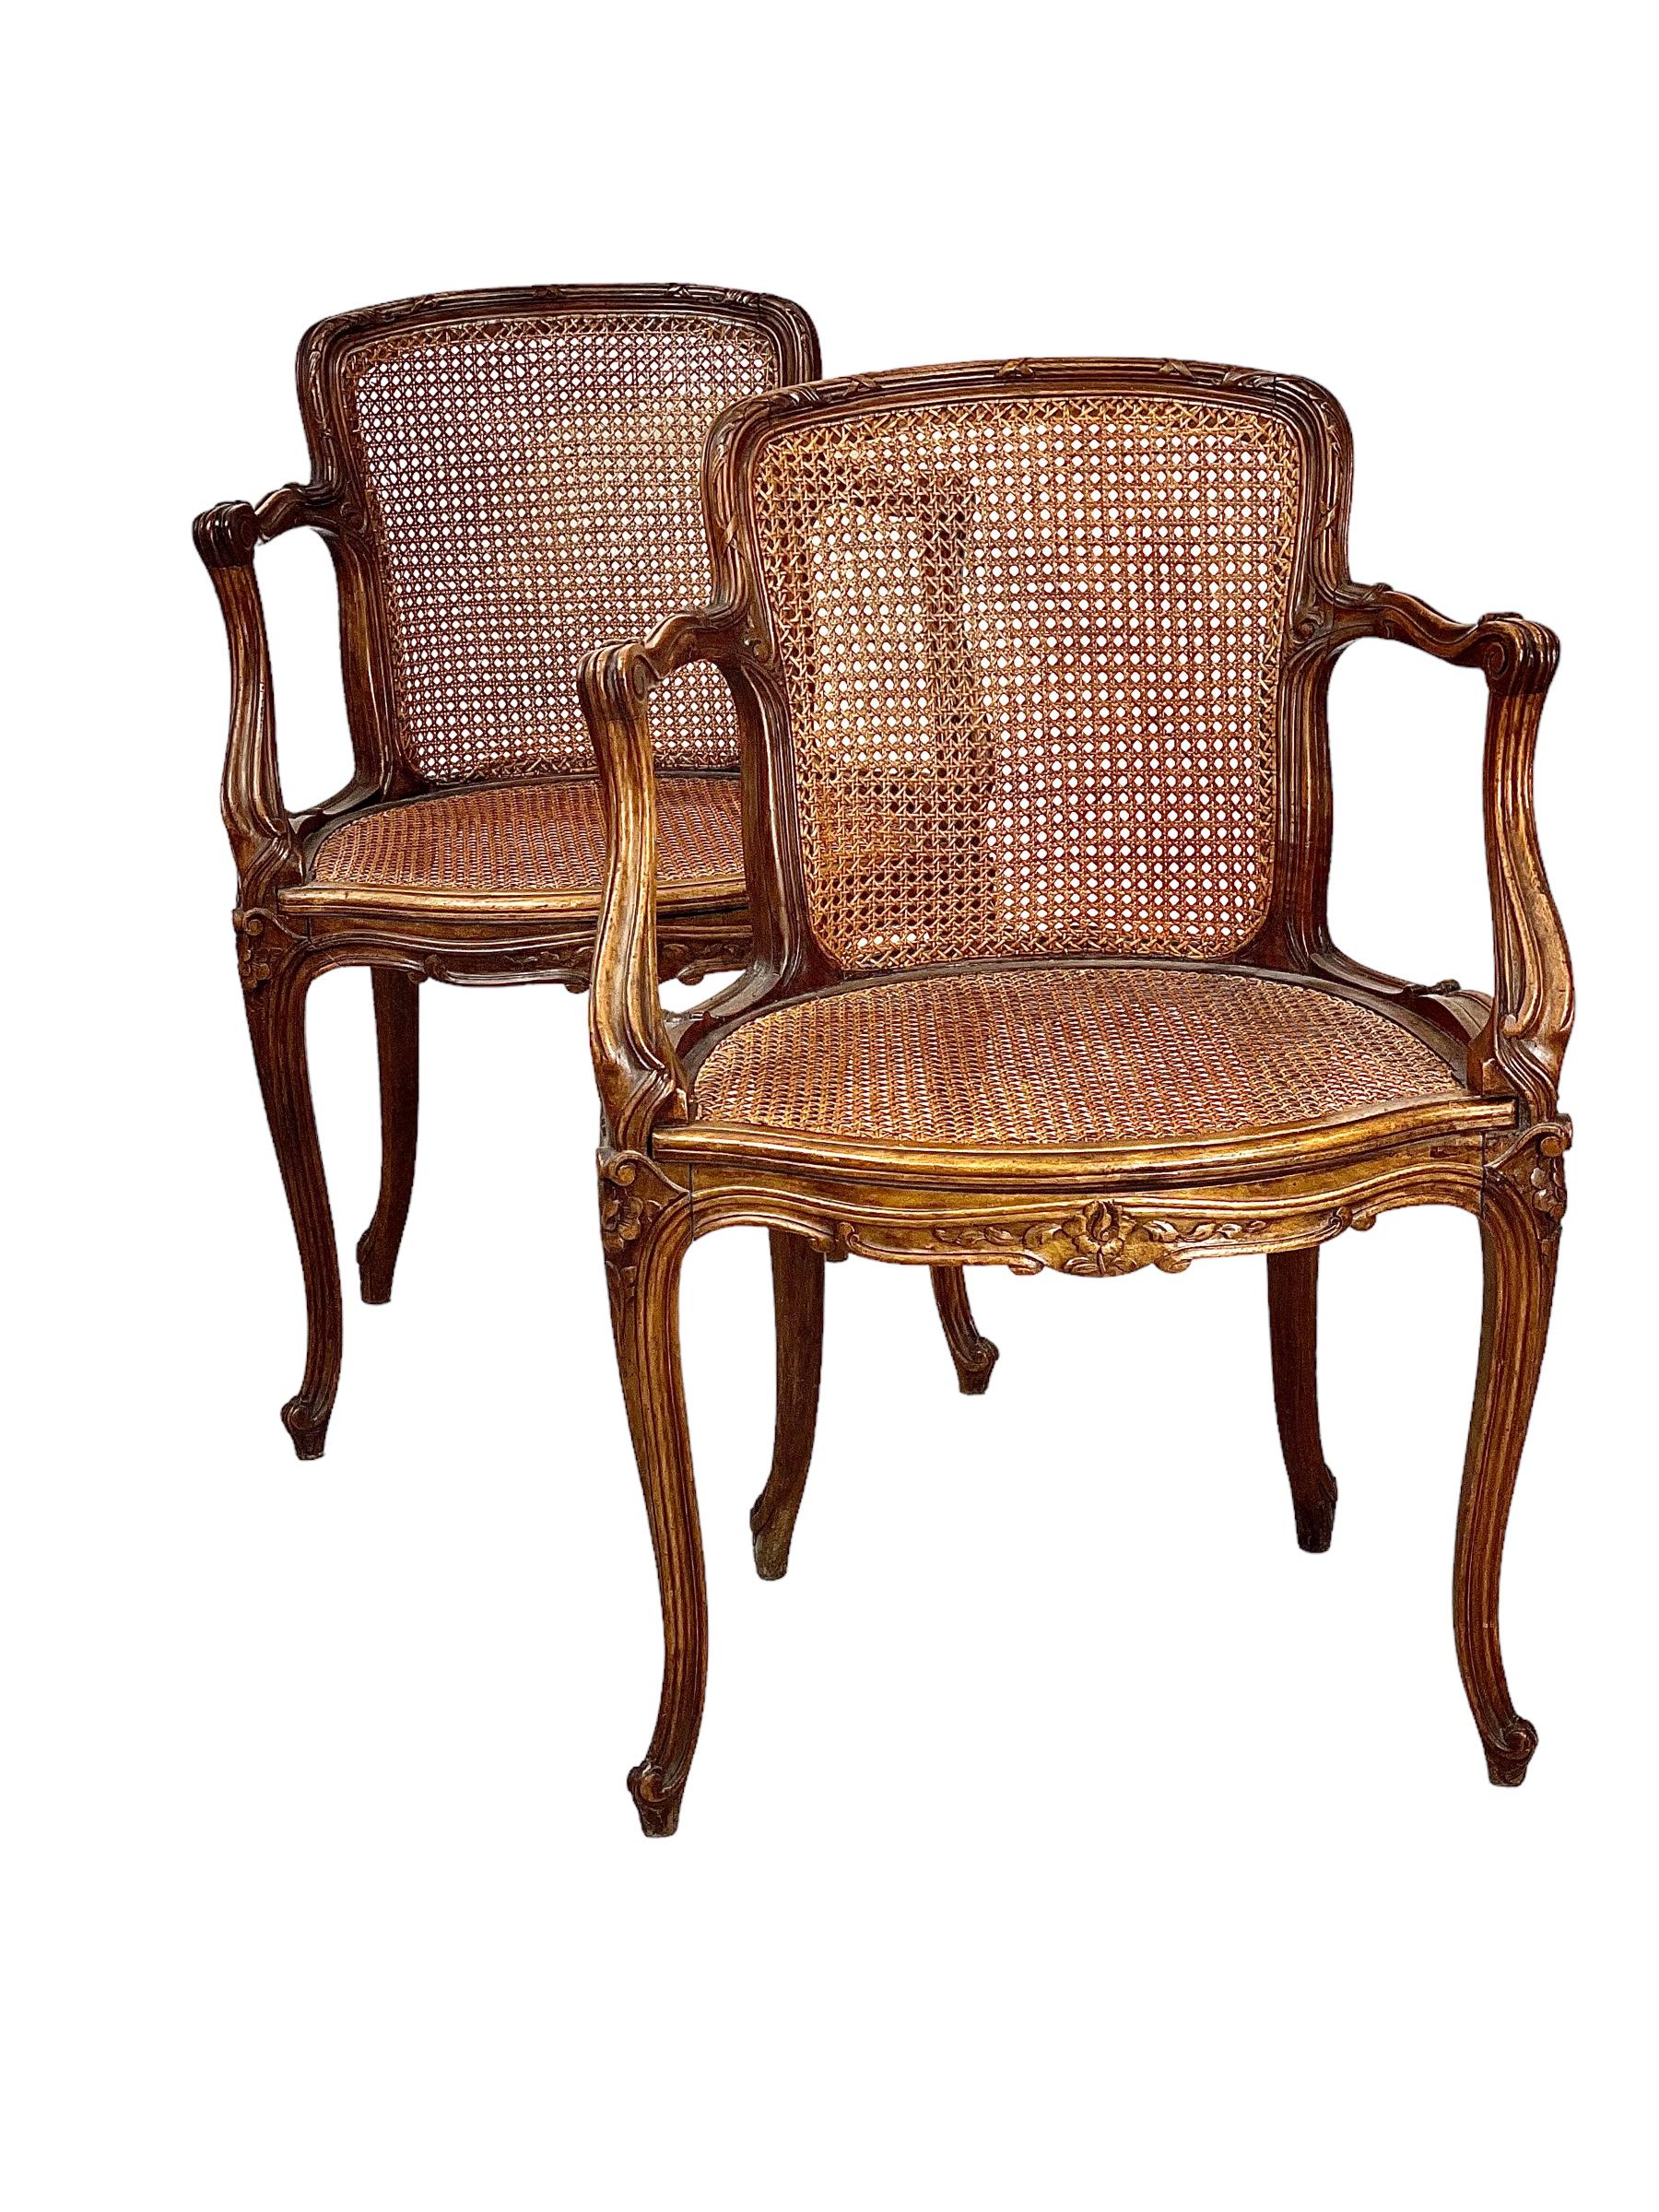 An exceptionally comfortable pair of French Louis XV style ‘Fauteuils Cabriolets’ armchairs, with carved embellishments to the legs, apron, arm rests and top rail, while the back rests and seats are fitted with the original hand-woven cane. Elegant